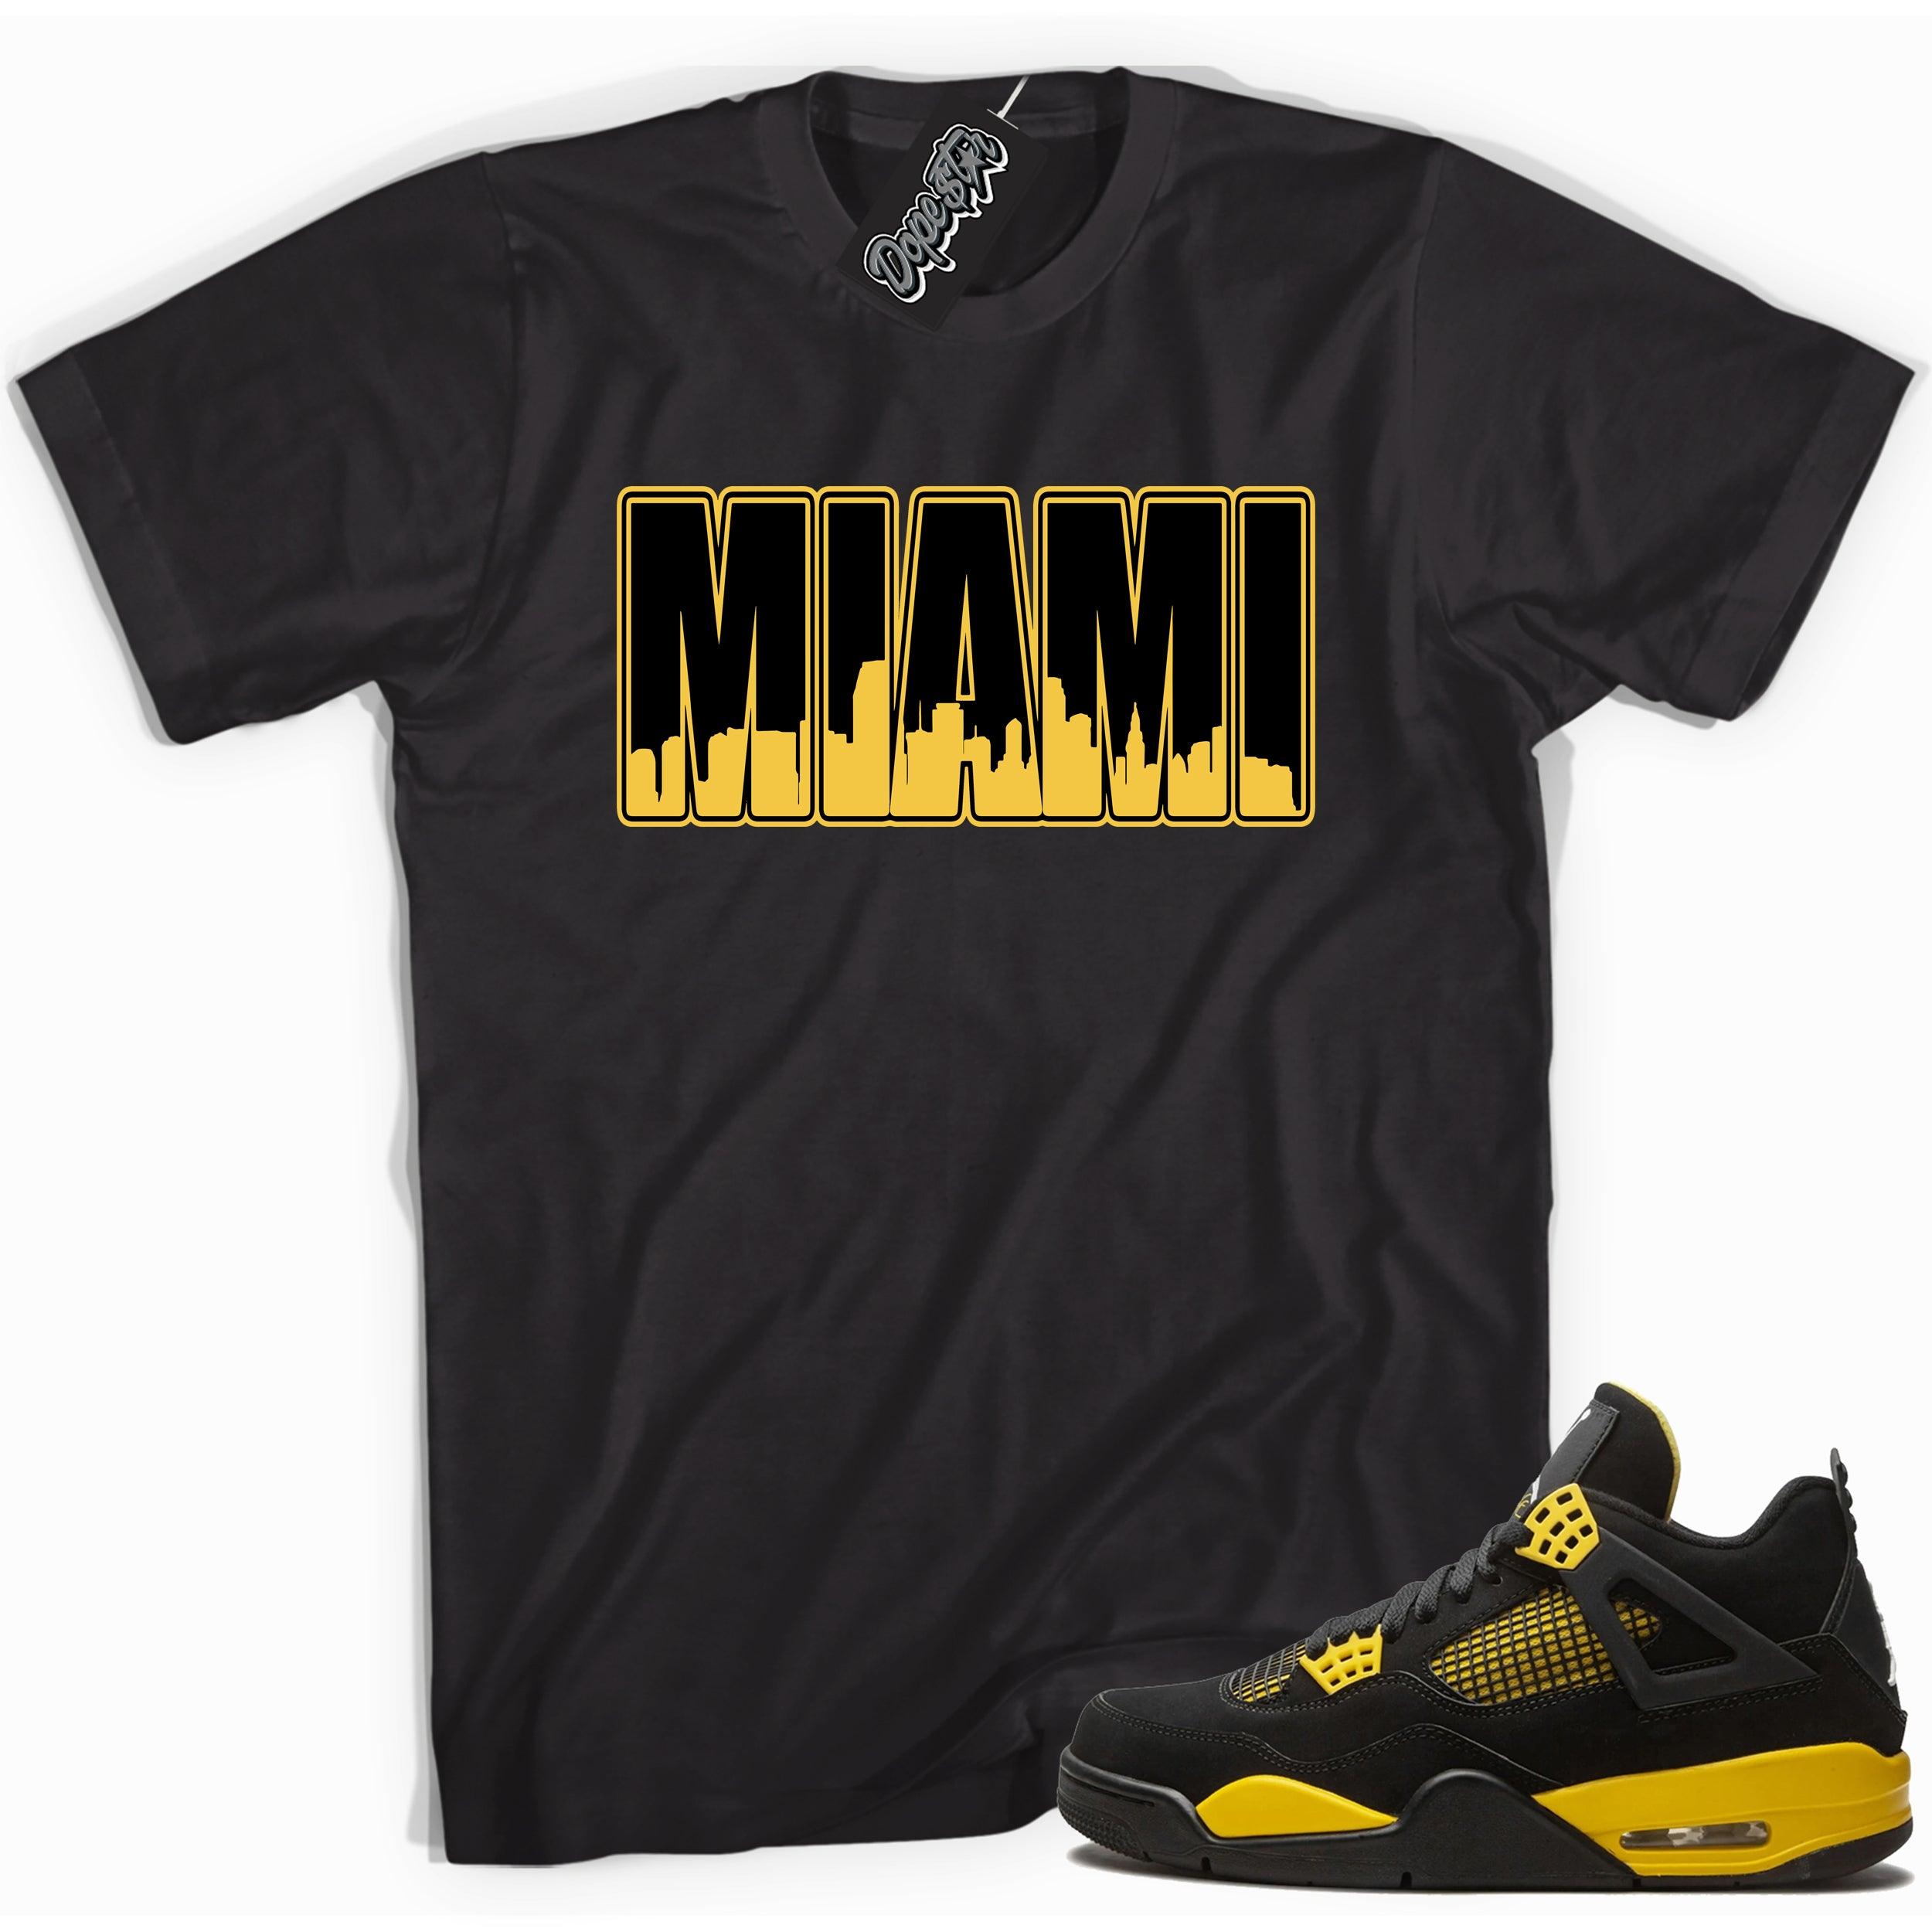 Cool black graphic tee with 'miami' print, that perfectly matches Air Jordan 4 Thunder sneakers